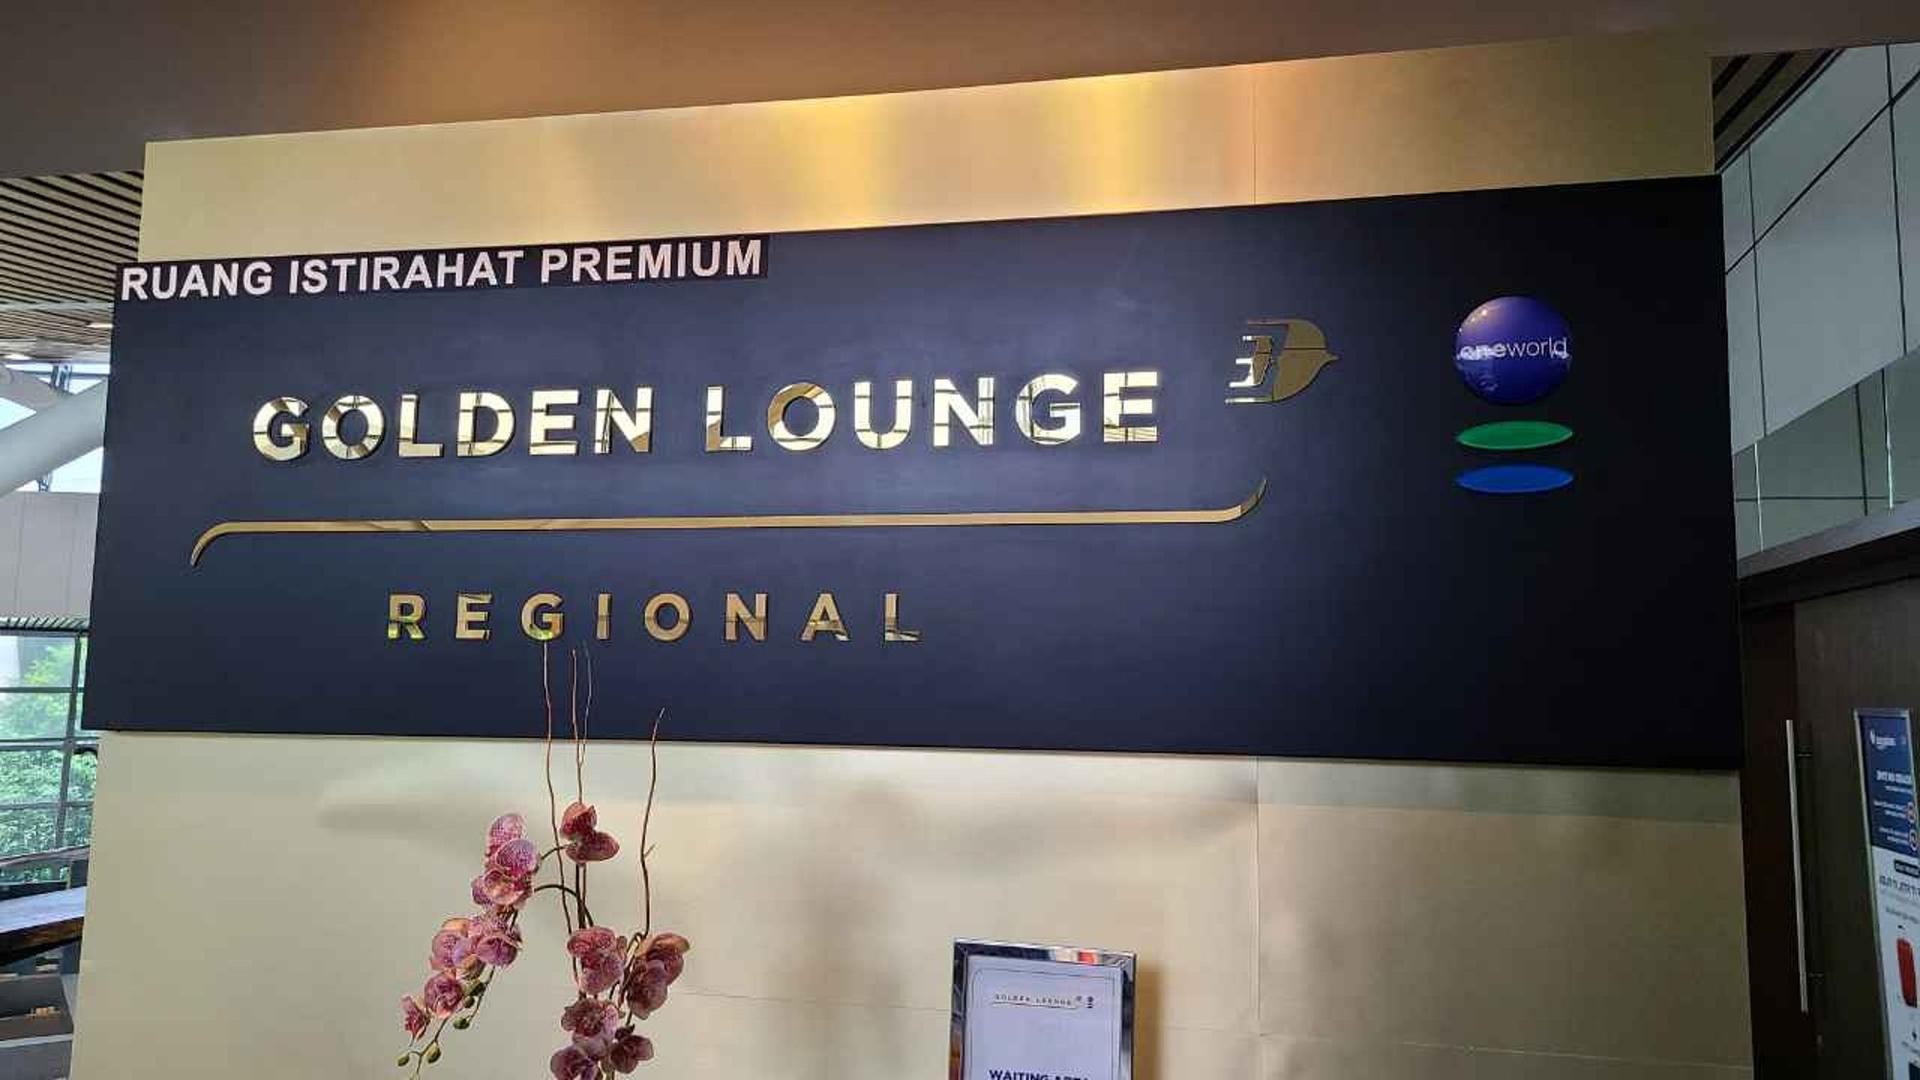 Malaysia Airlines Golden Lounge (Regional) image 2 of 13